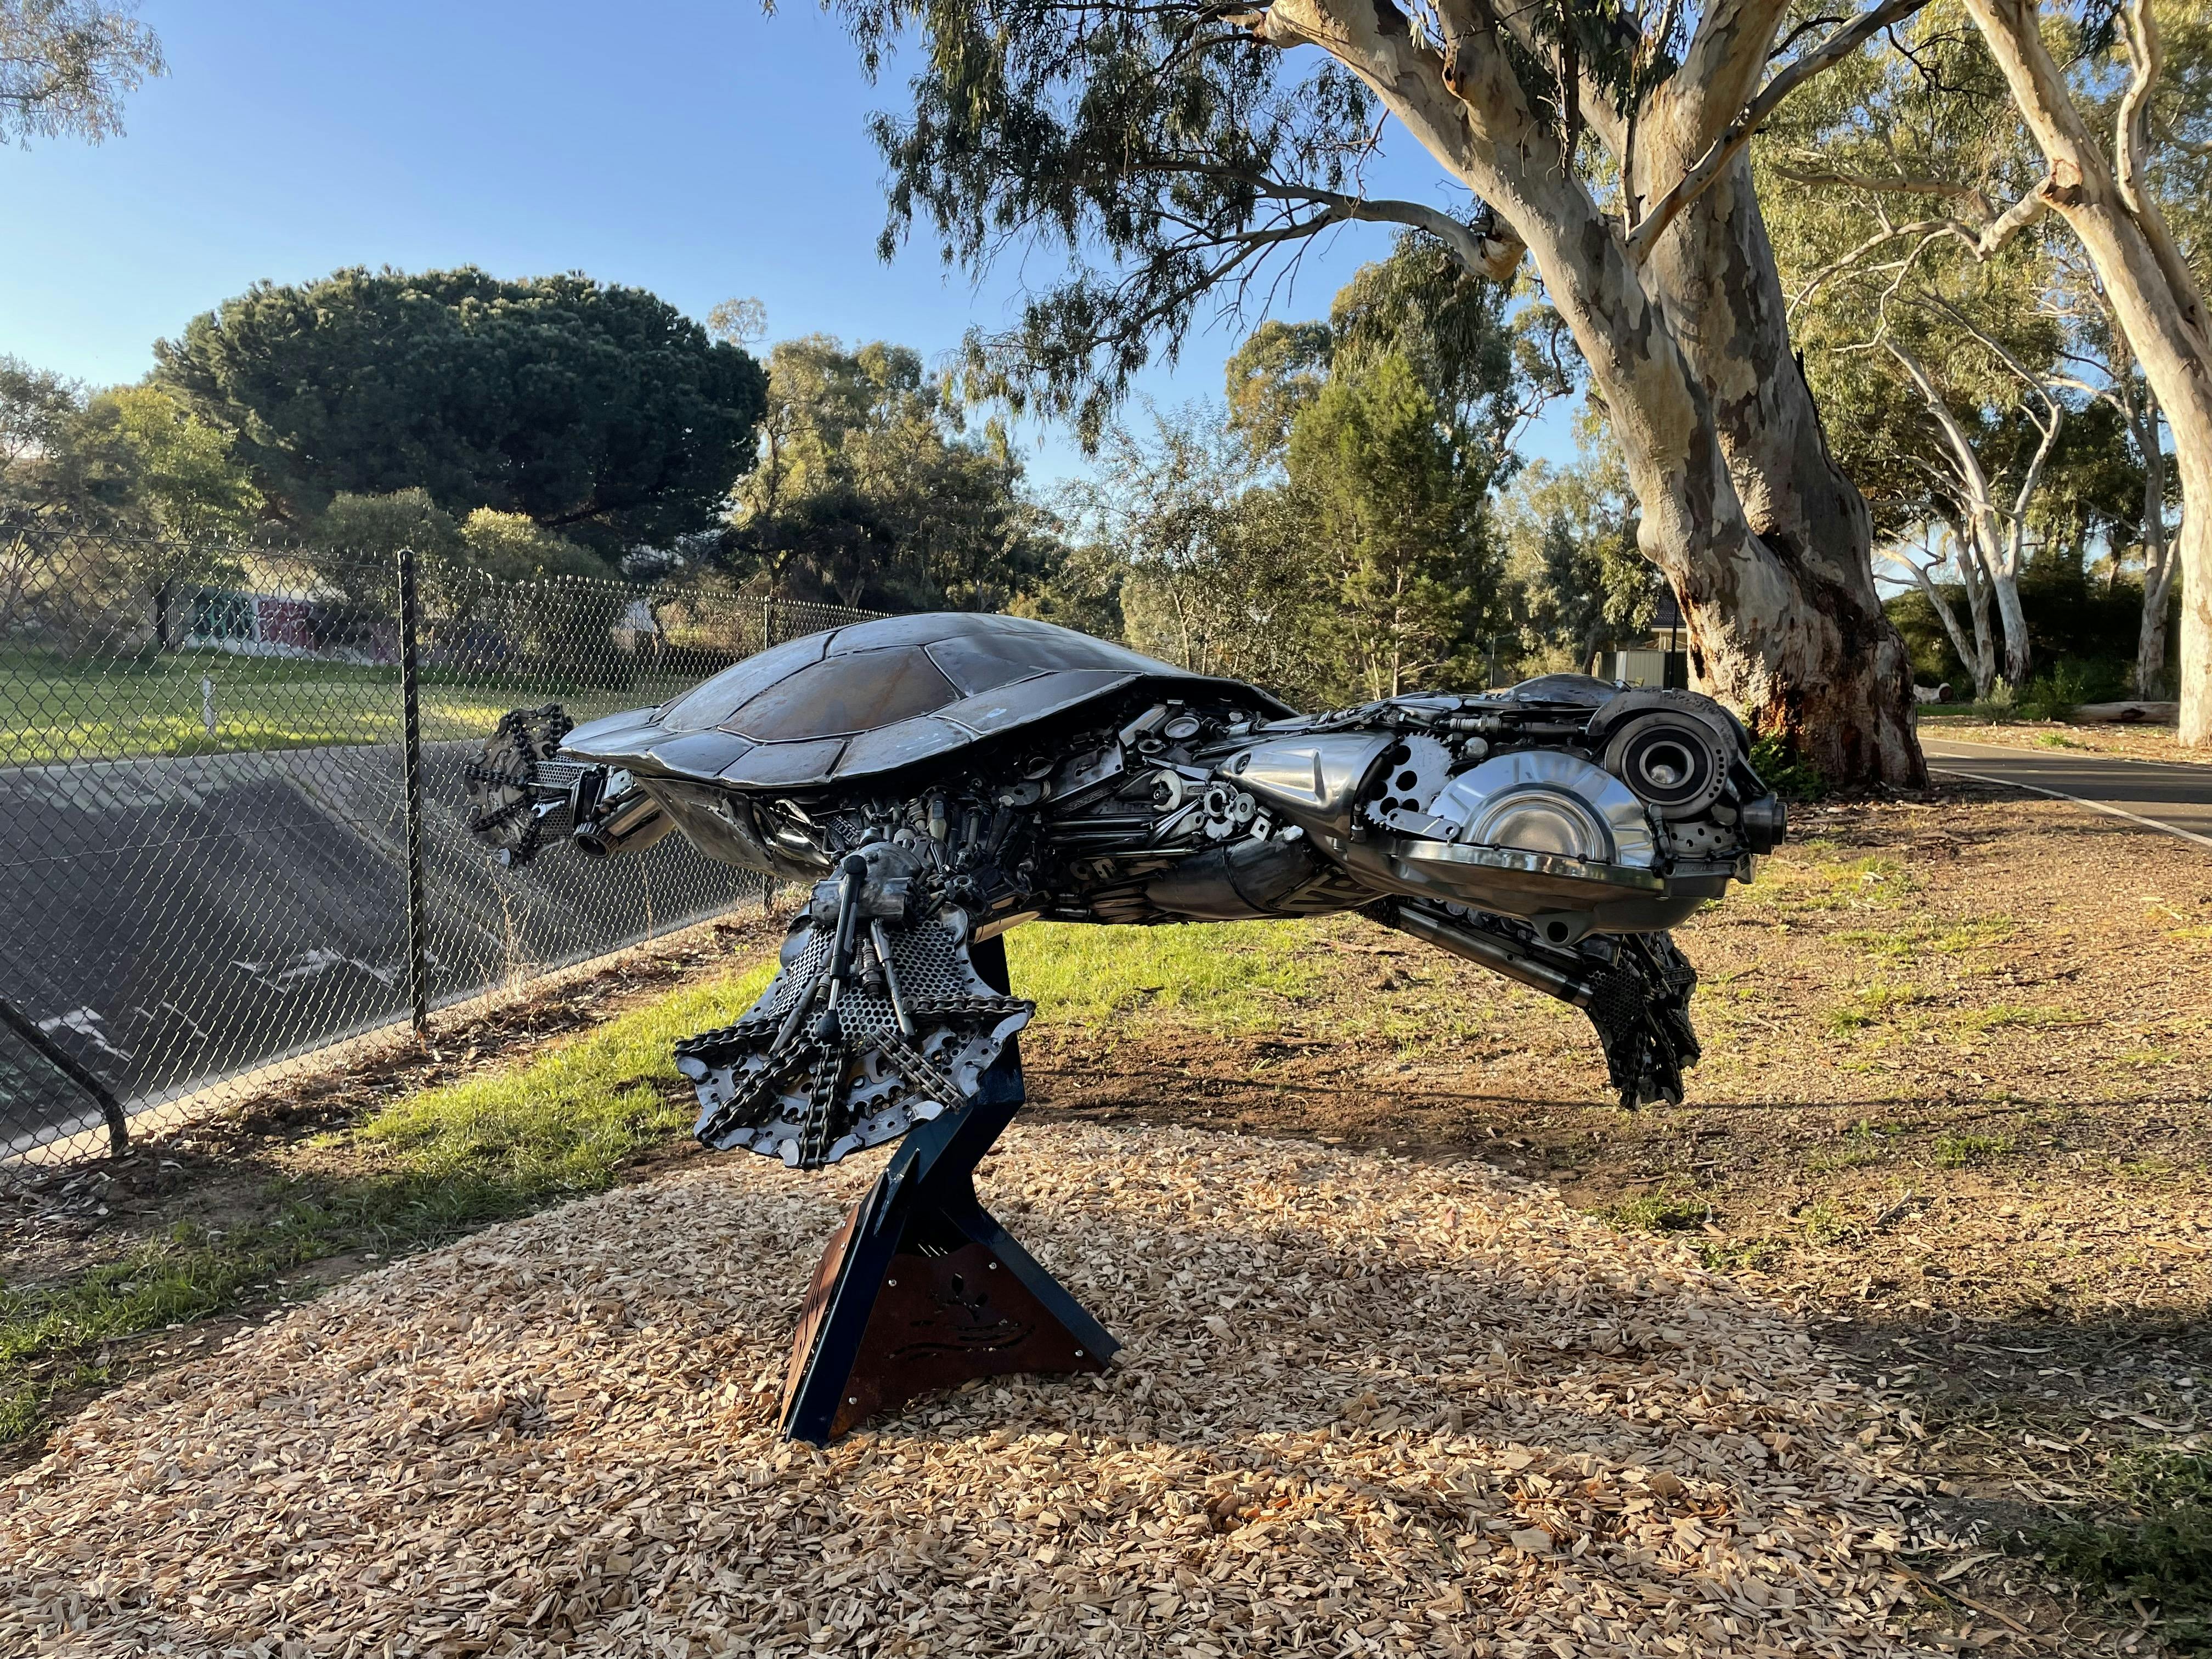 "Plastron" part of Reclaiming Sturt River project 2021 by James Stewart. Commissioned by City of Marion